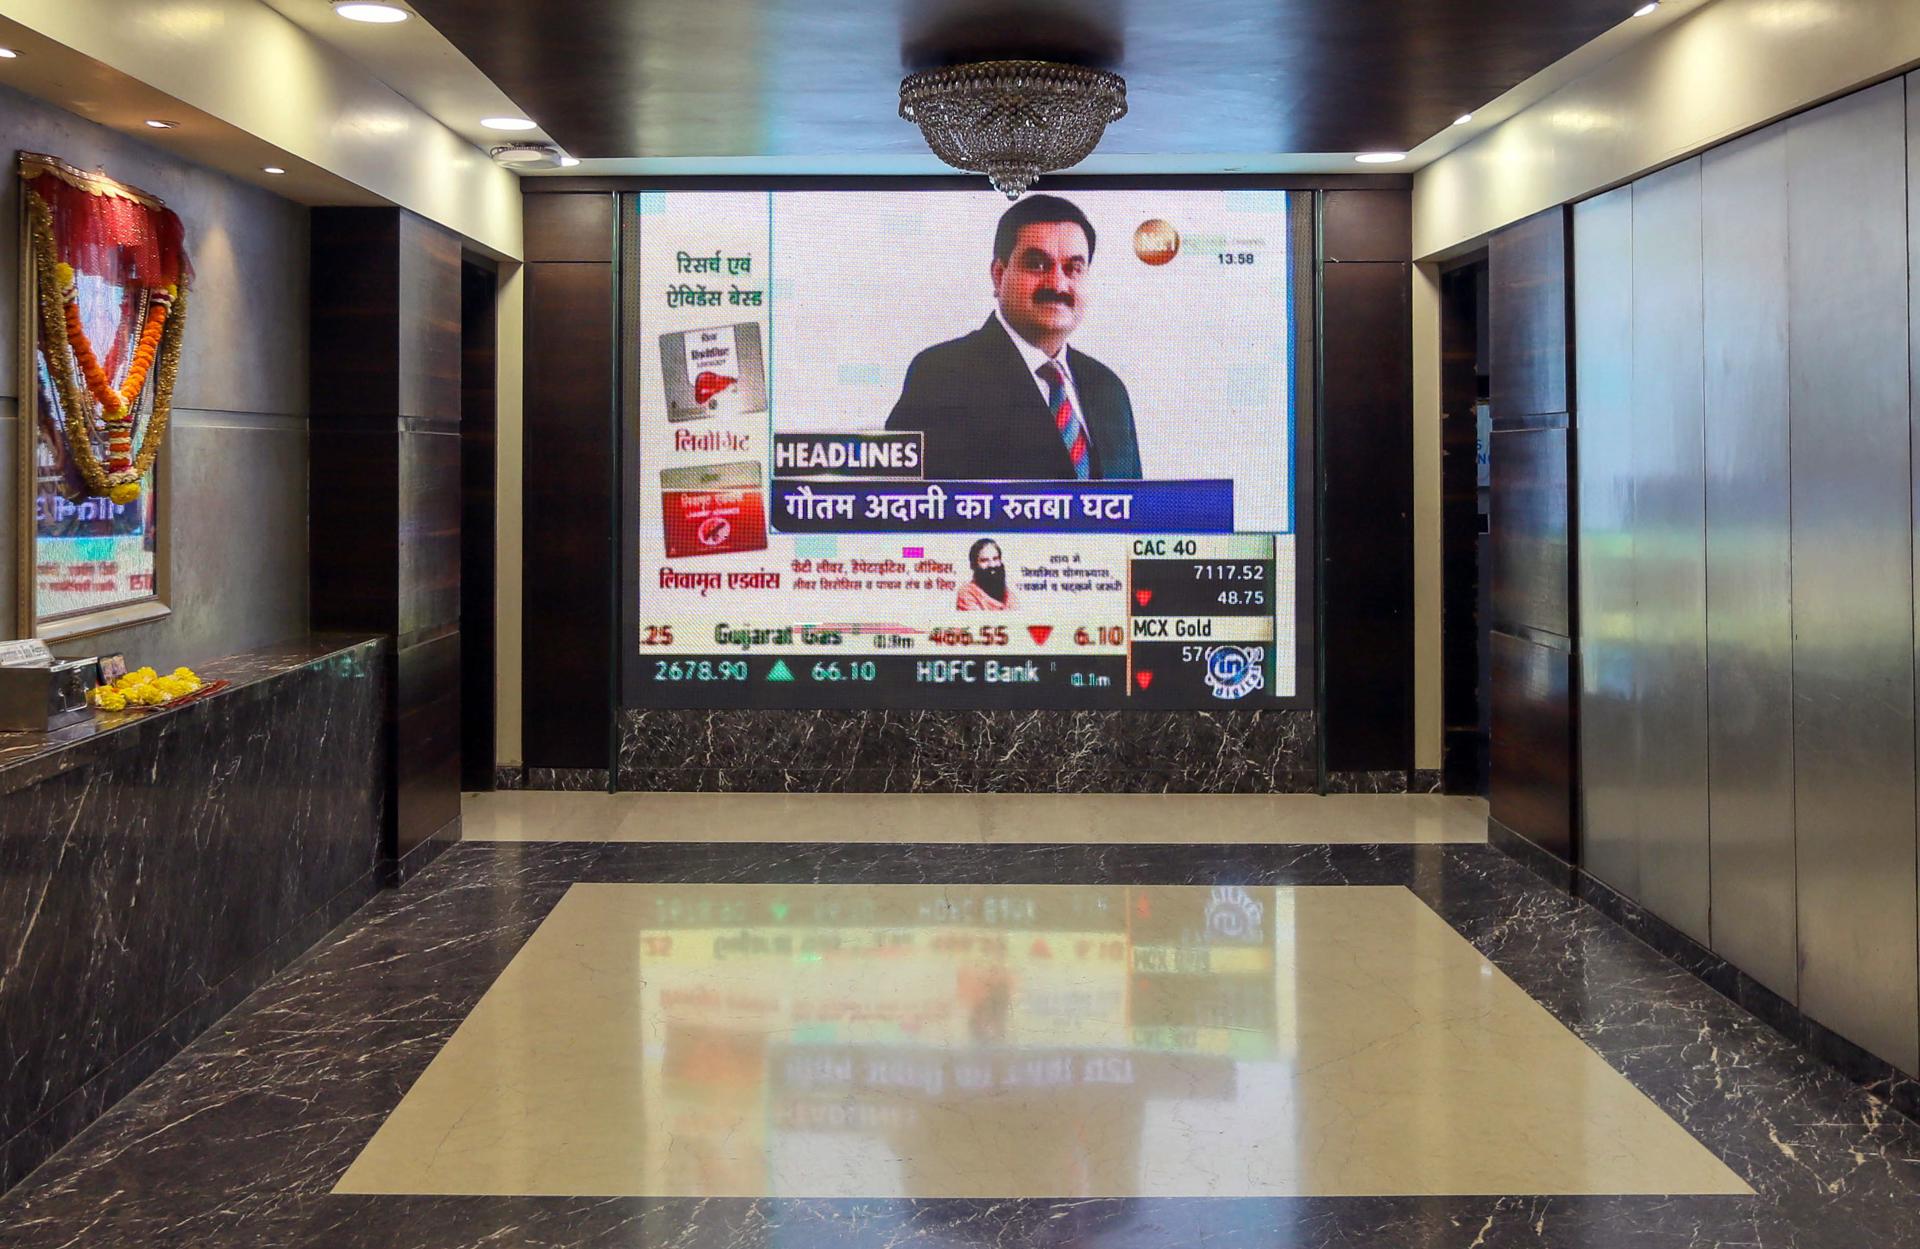 A screen at the entrance of the Bombay Stock Exchange (BSE) displays news on the Adani Group in Mumbai, India, 03 February 2023. EFE/EPA/FILE/DIVYAKANT SOLANKI